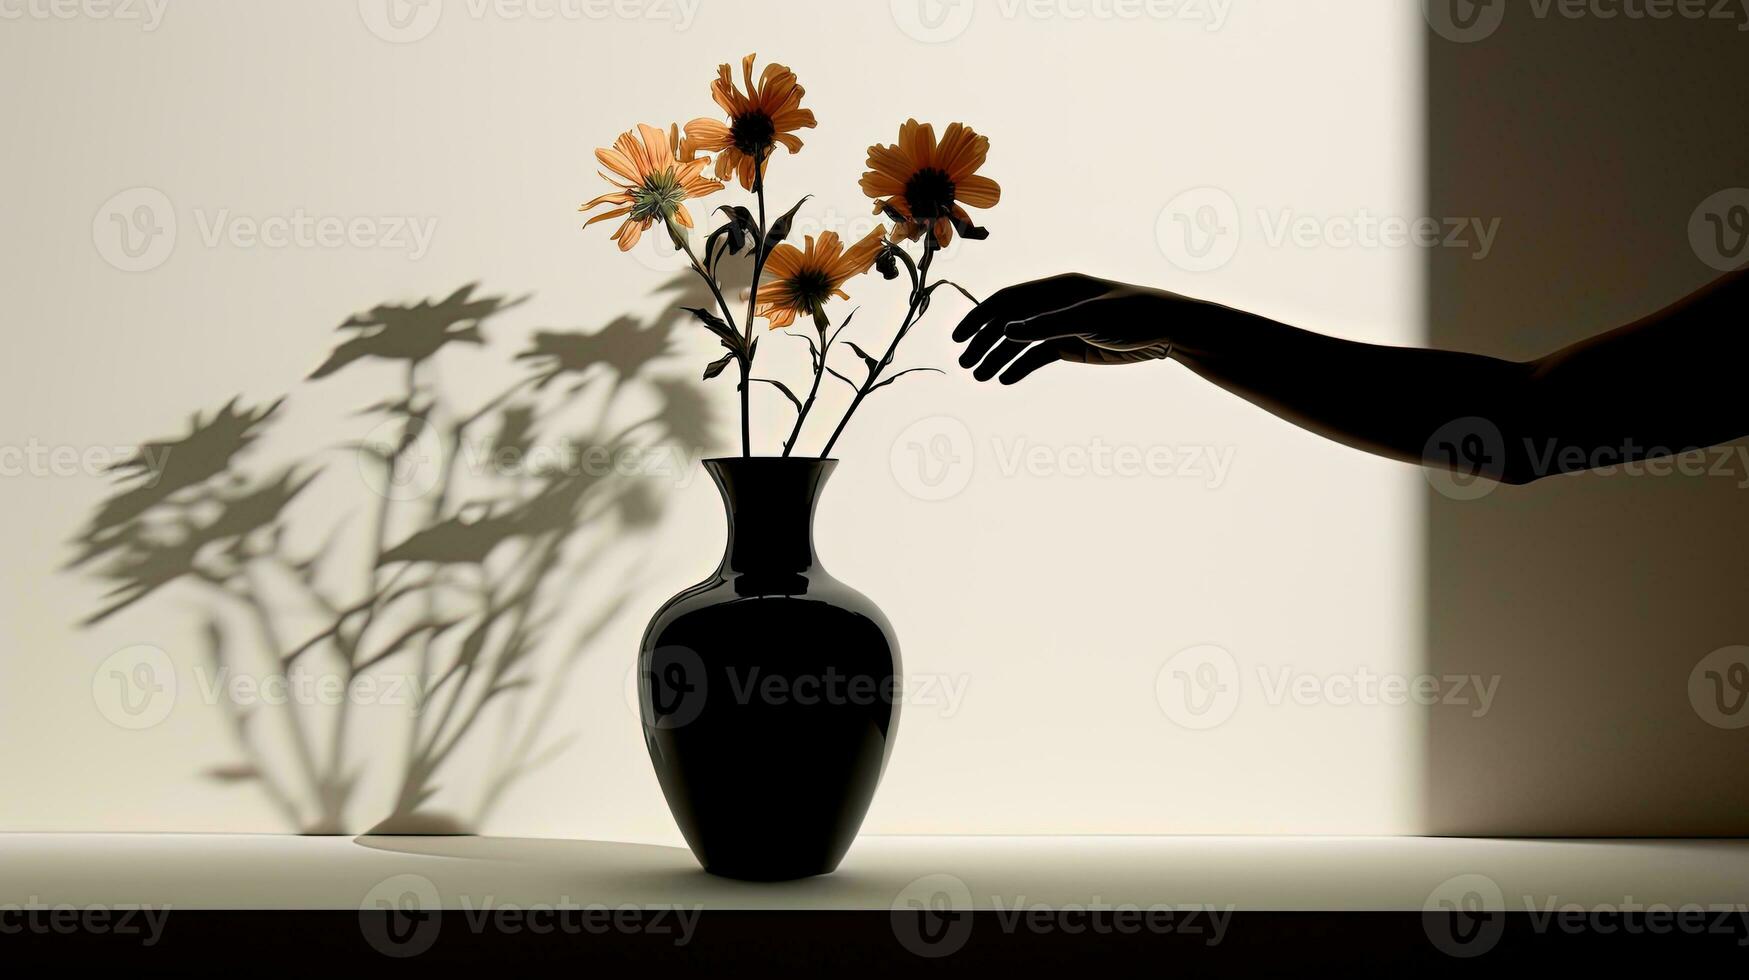 A hand s shadow seeks vase flowers. silhouette concept photo